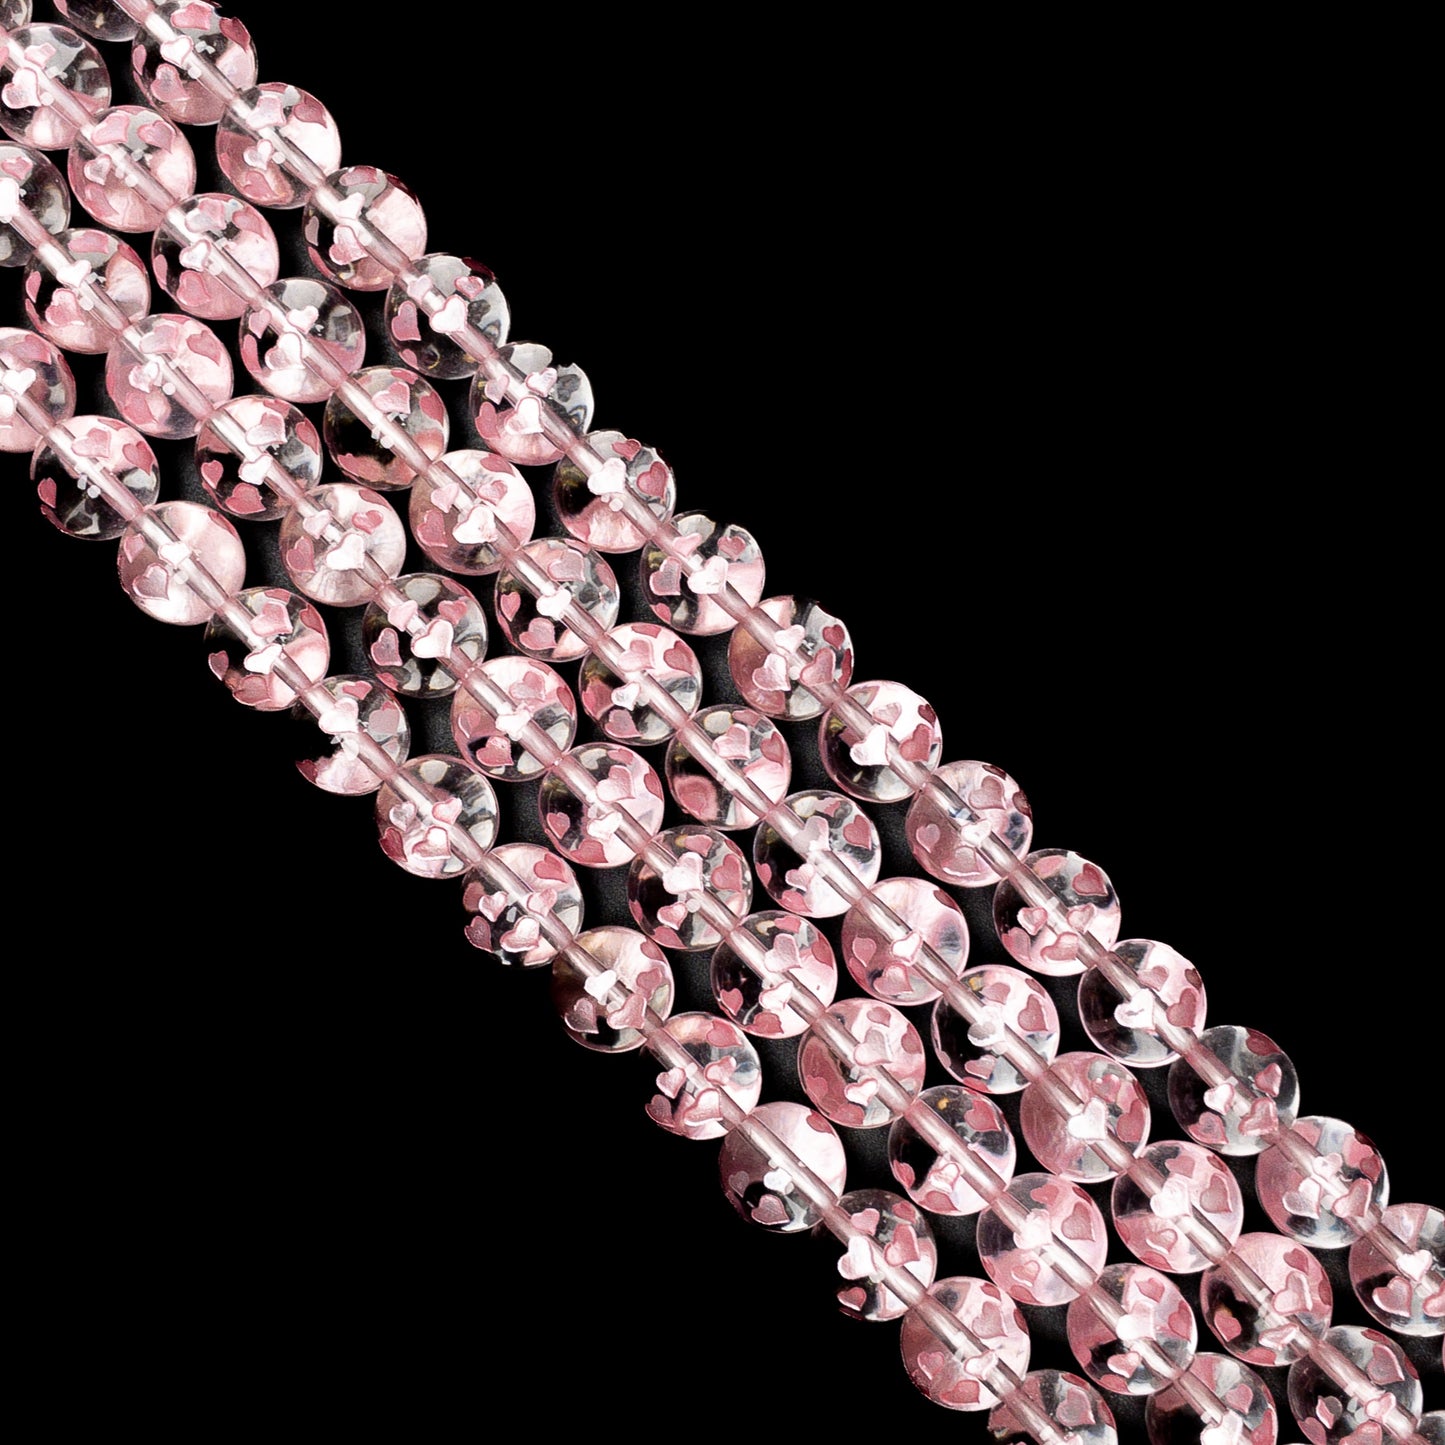 LOVE BUBBLES: Crystal Quartz Etched Pink Hearts 10mm Round Bead - 7.5" Strand